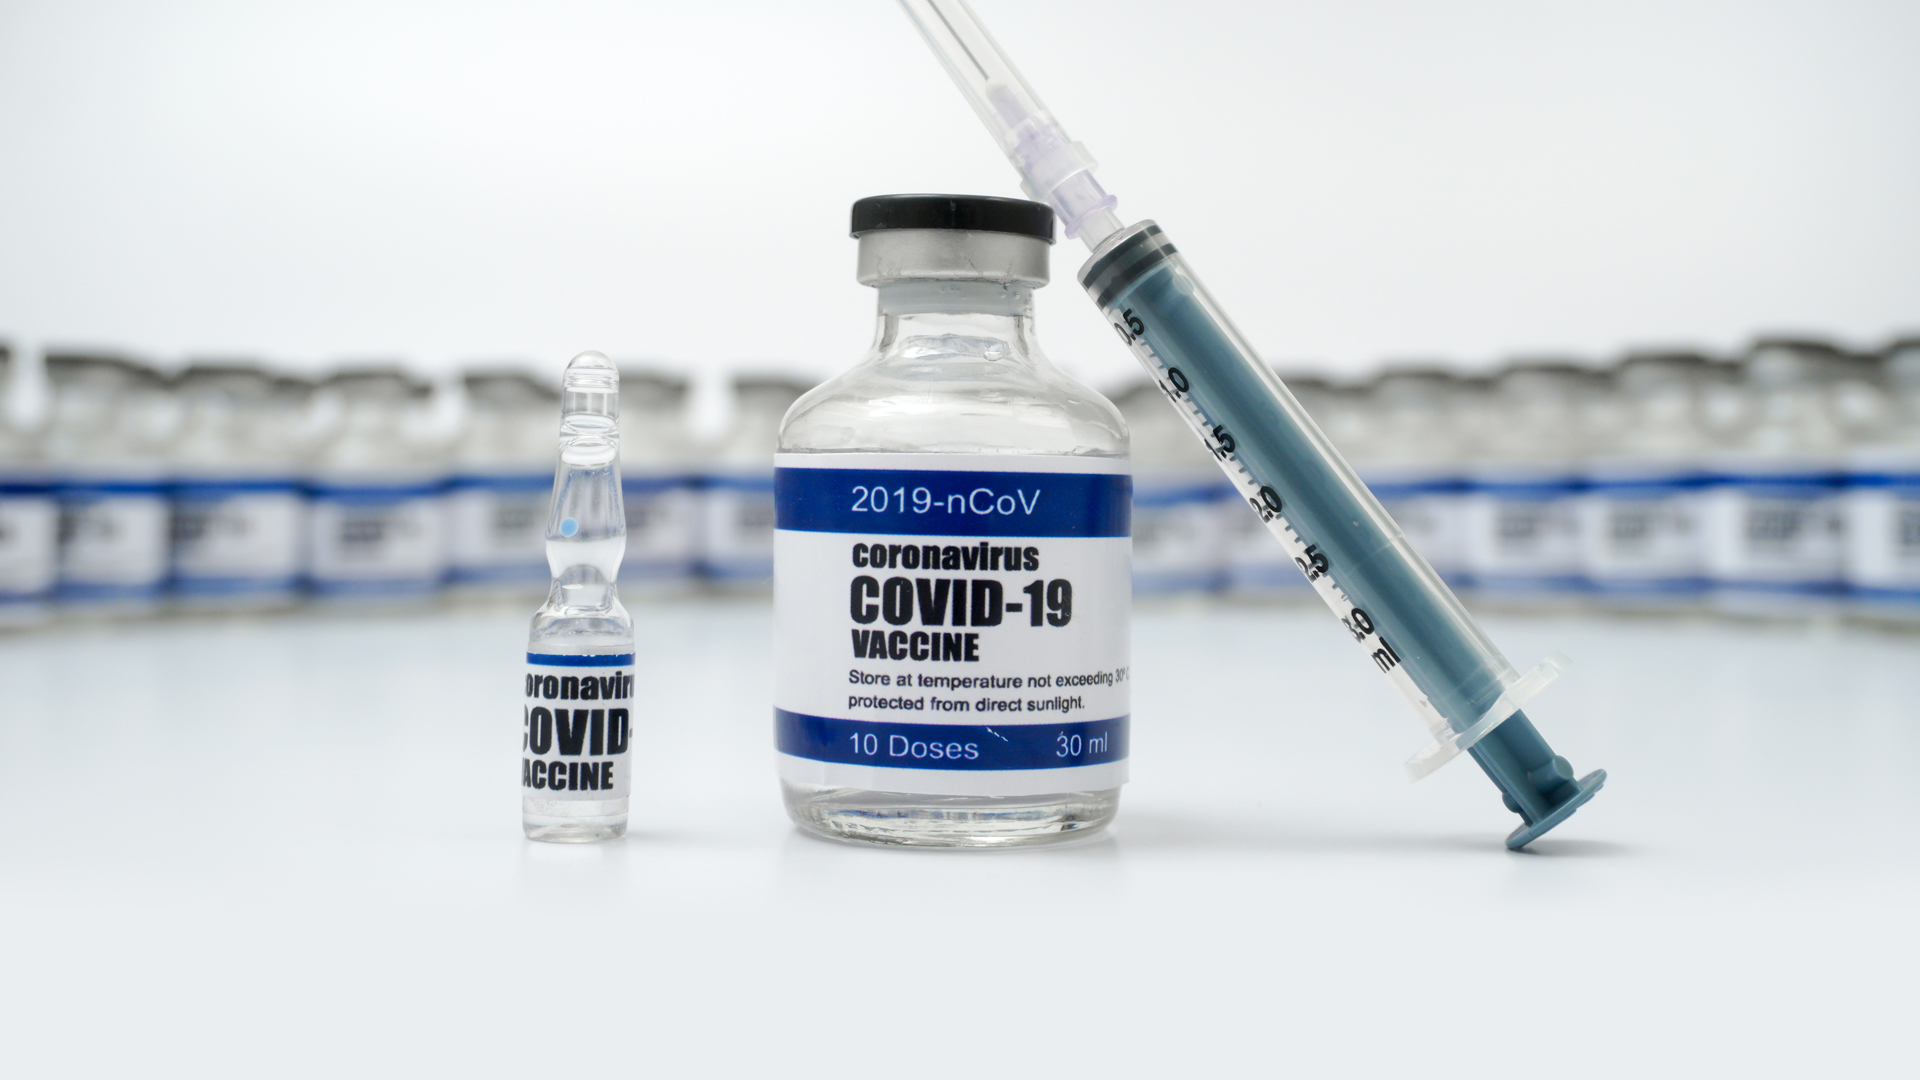 covid vaccine image zoomed out